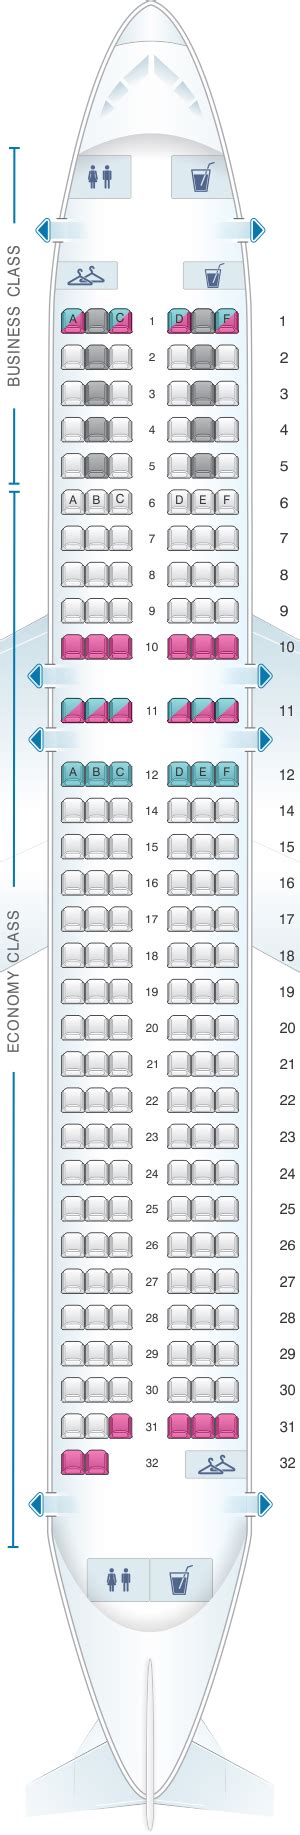 Seat Map Air France Airbus A320 Europe V2 Seatmaestro